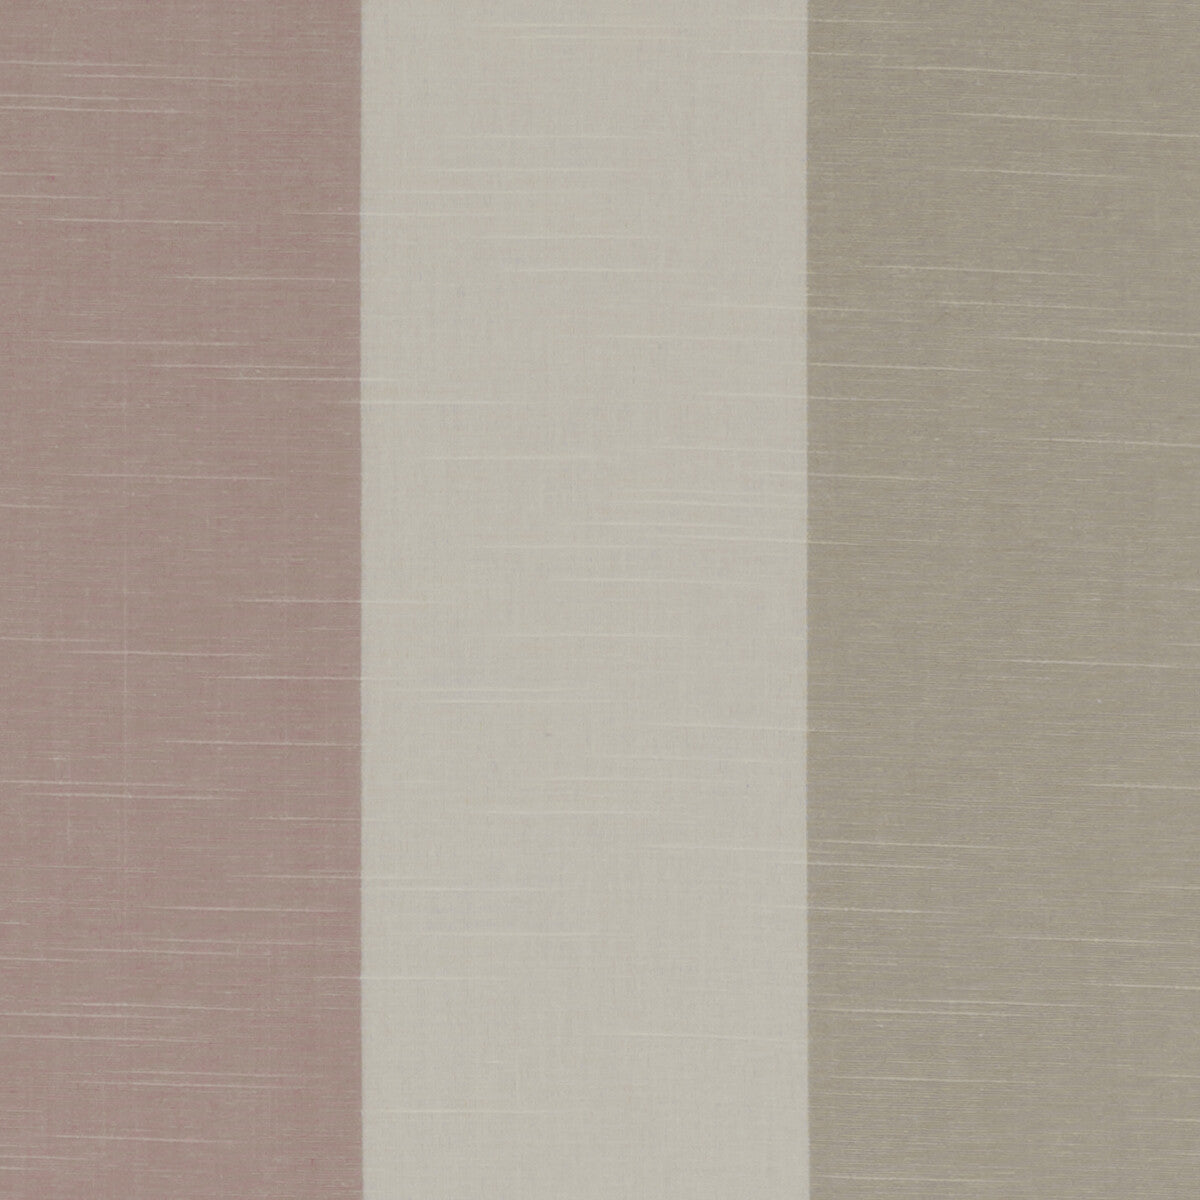 Buckton fabric in blush color - pattern F1308/02.CAC.0 - by Clarke And Clarke in the Bempton By Studio G For C&amp;C collection